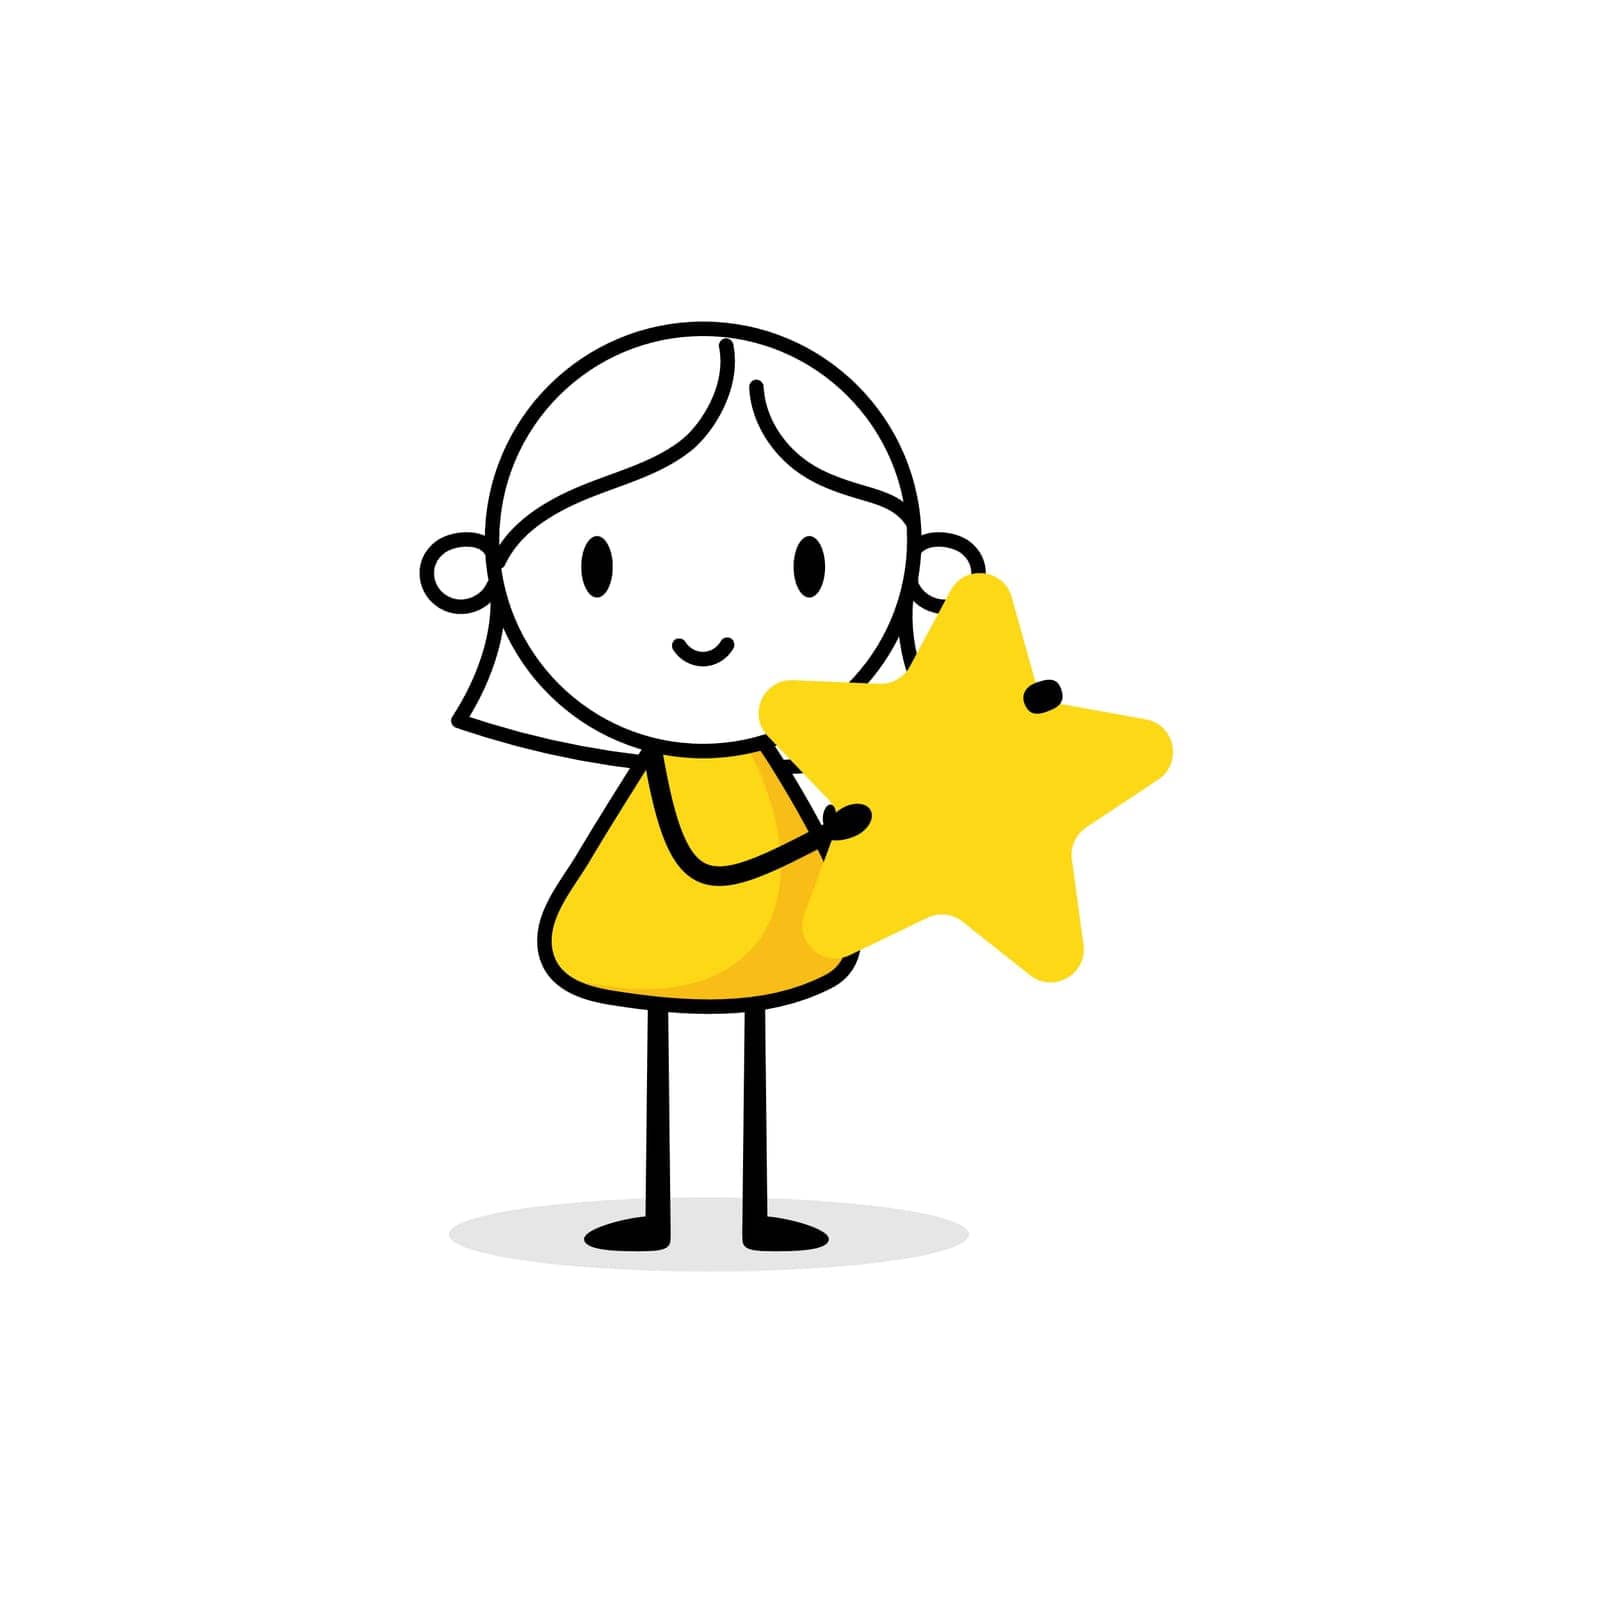 Comic woman character holds a star in her hands. Customer reviews, feedback, evaluation, rate the service concept. Vector stock illustration by Melnyk